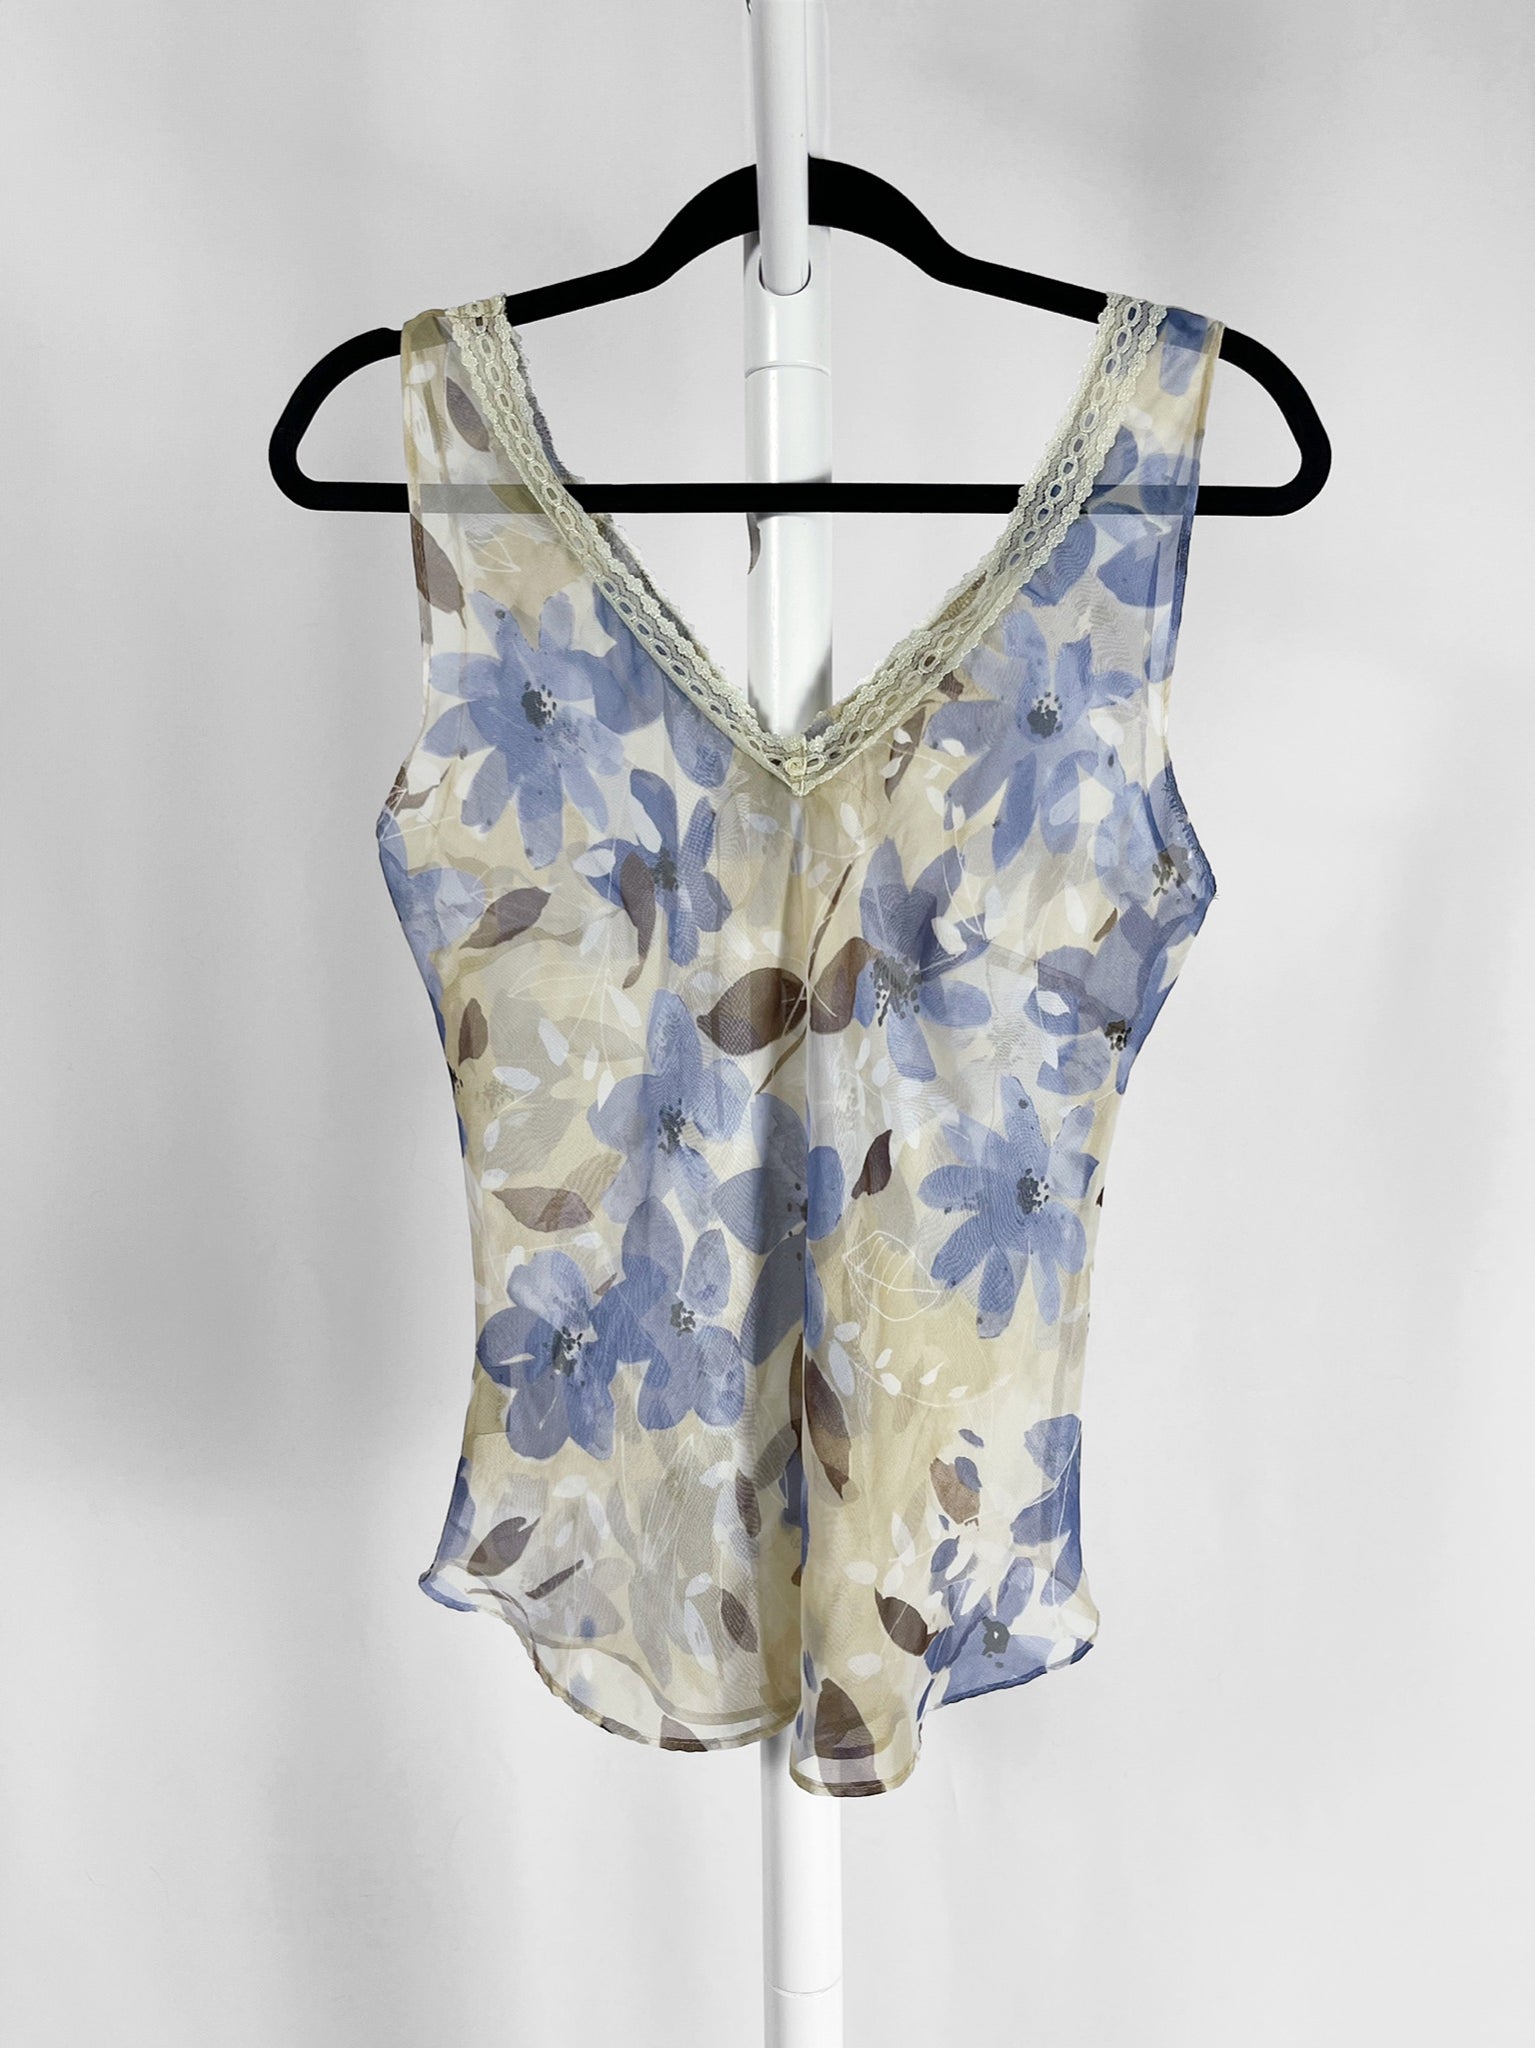 Vintage Sheer Floral Top with Lace Trim, Size S